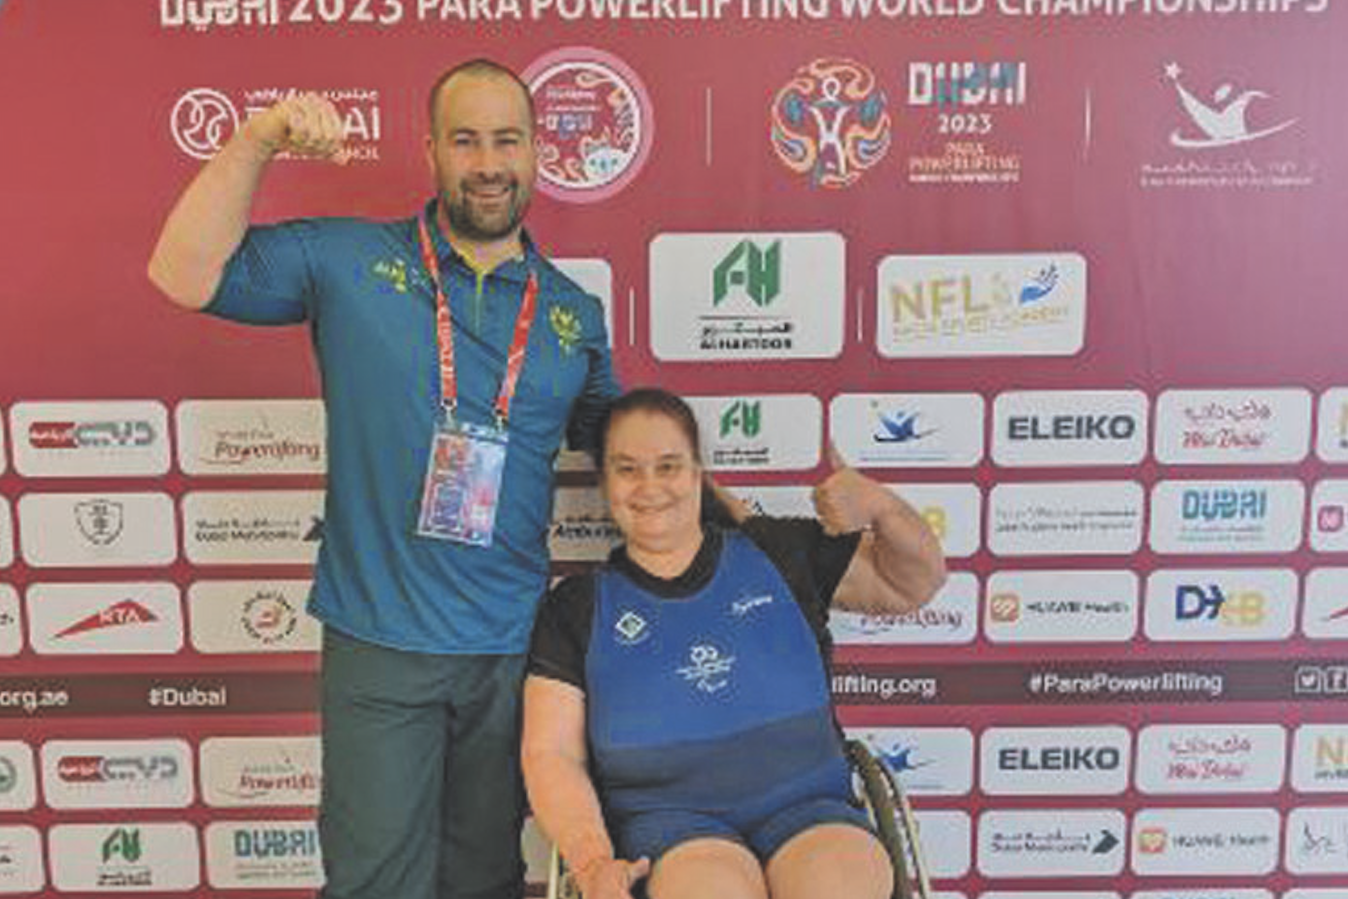 Trish Wallace and her coach Simon at the powerlifting world championships.